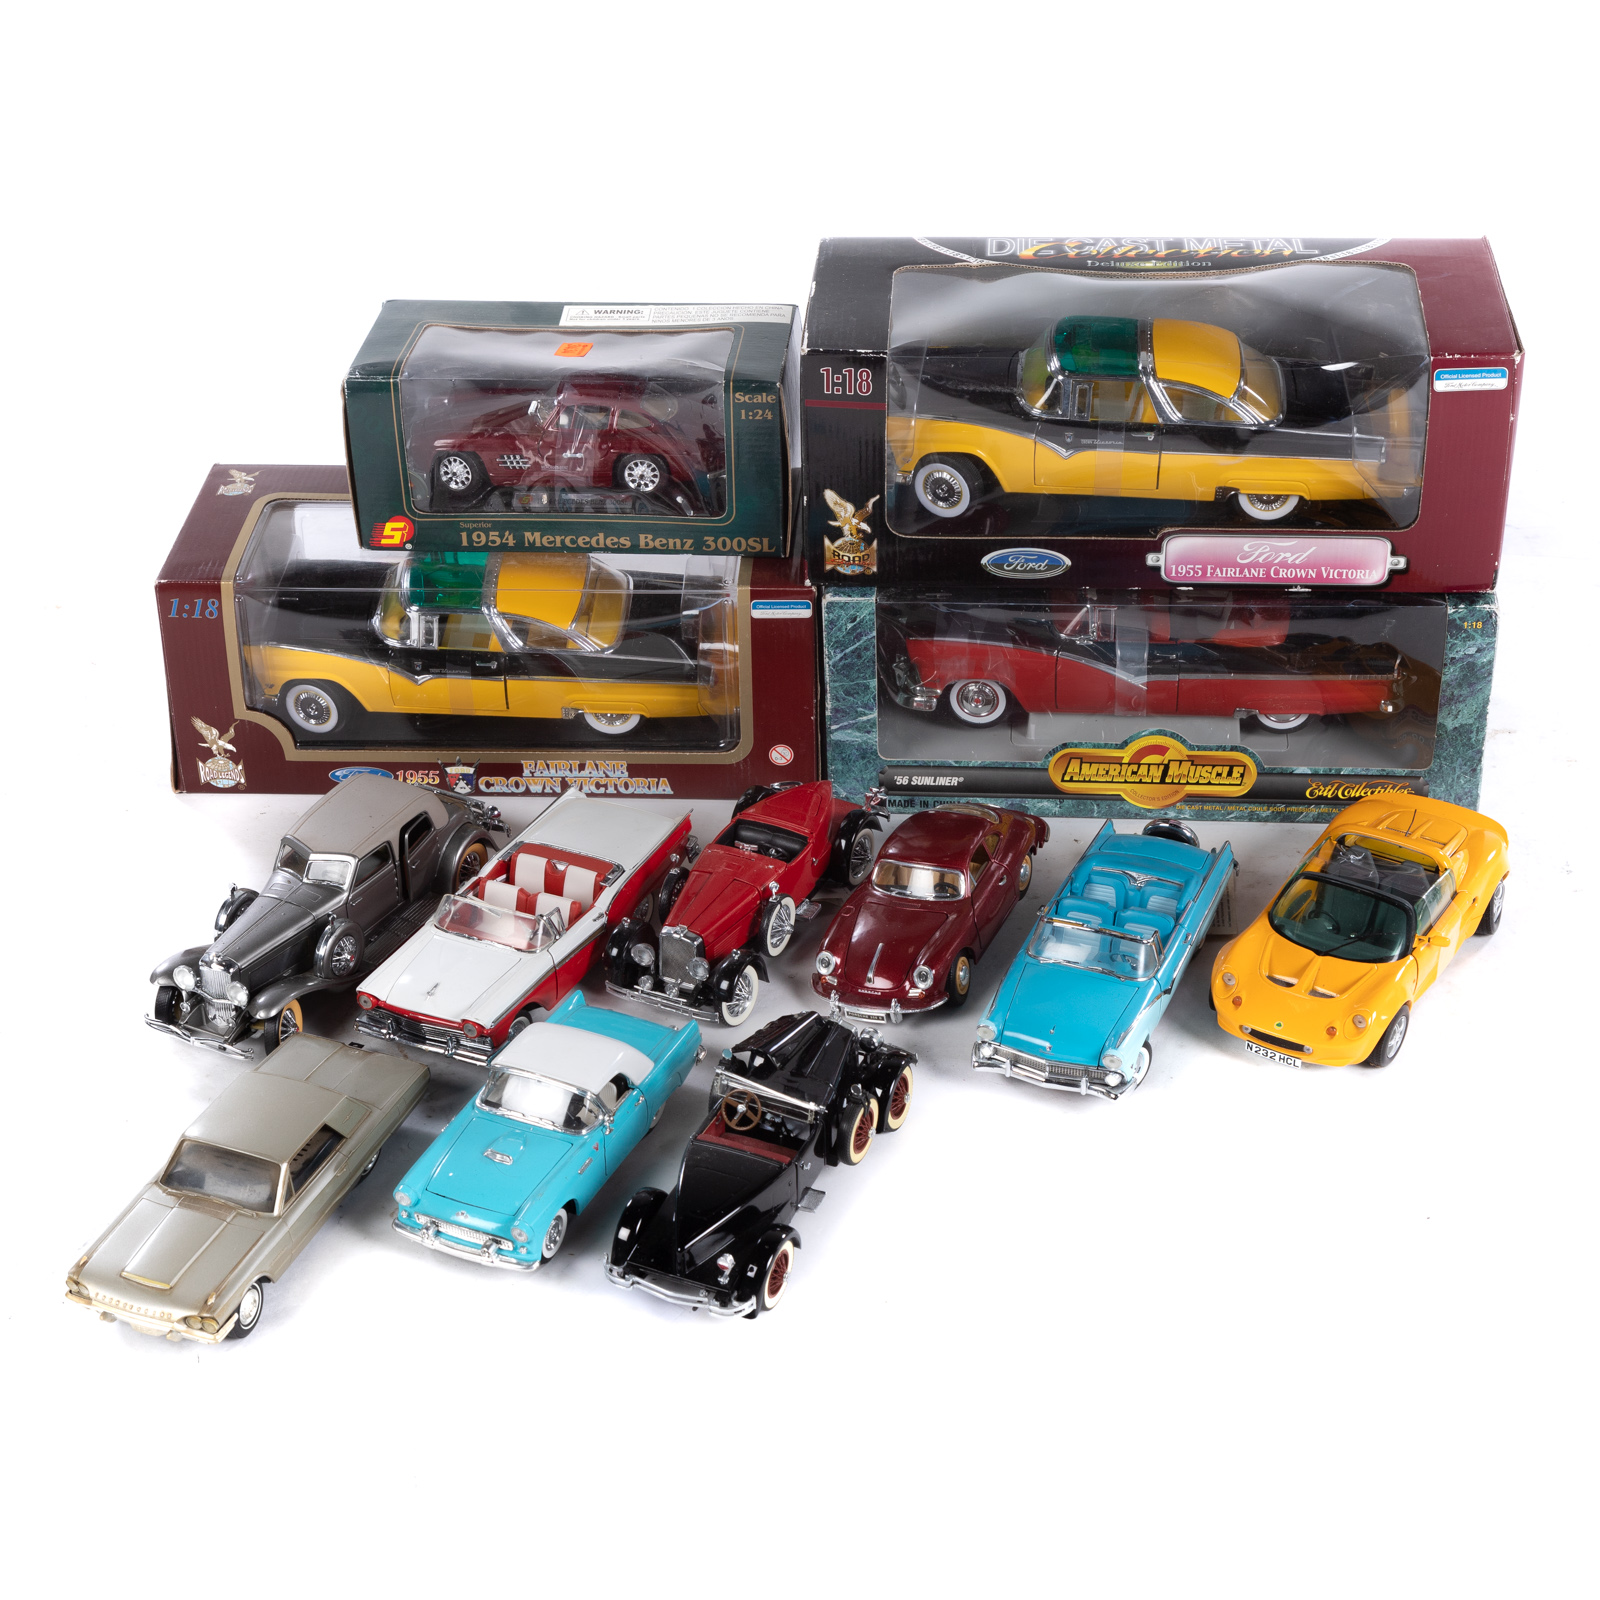 10 ASSORTED DIE CAST CARS Includes 36a198